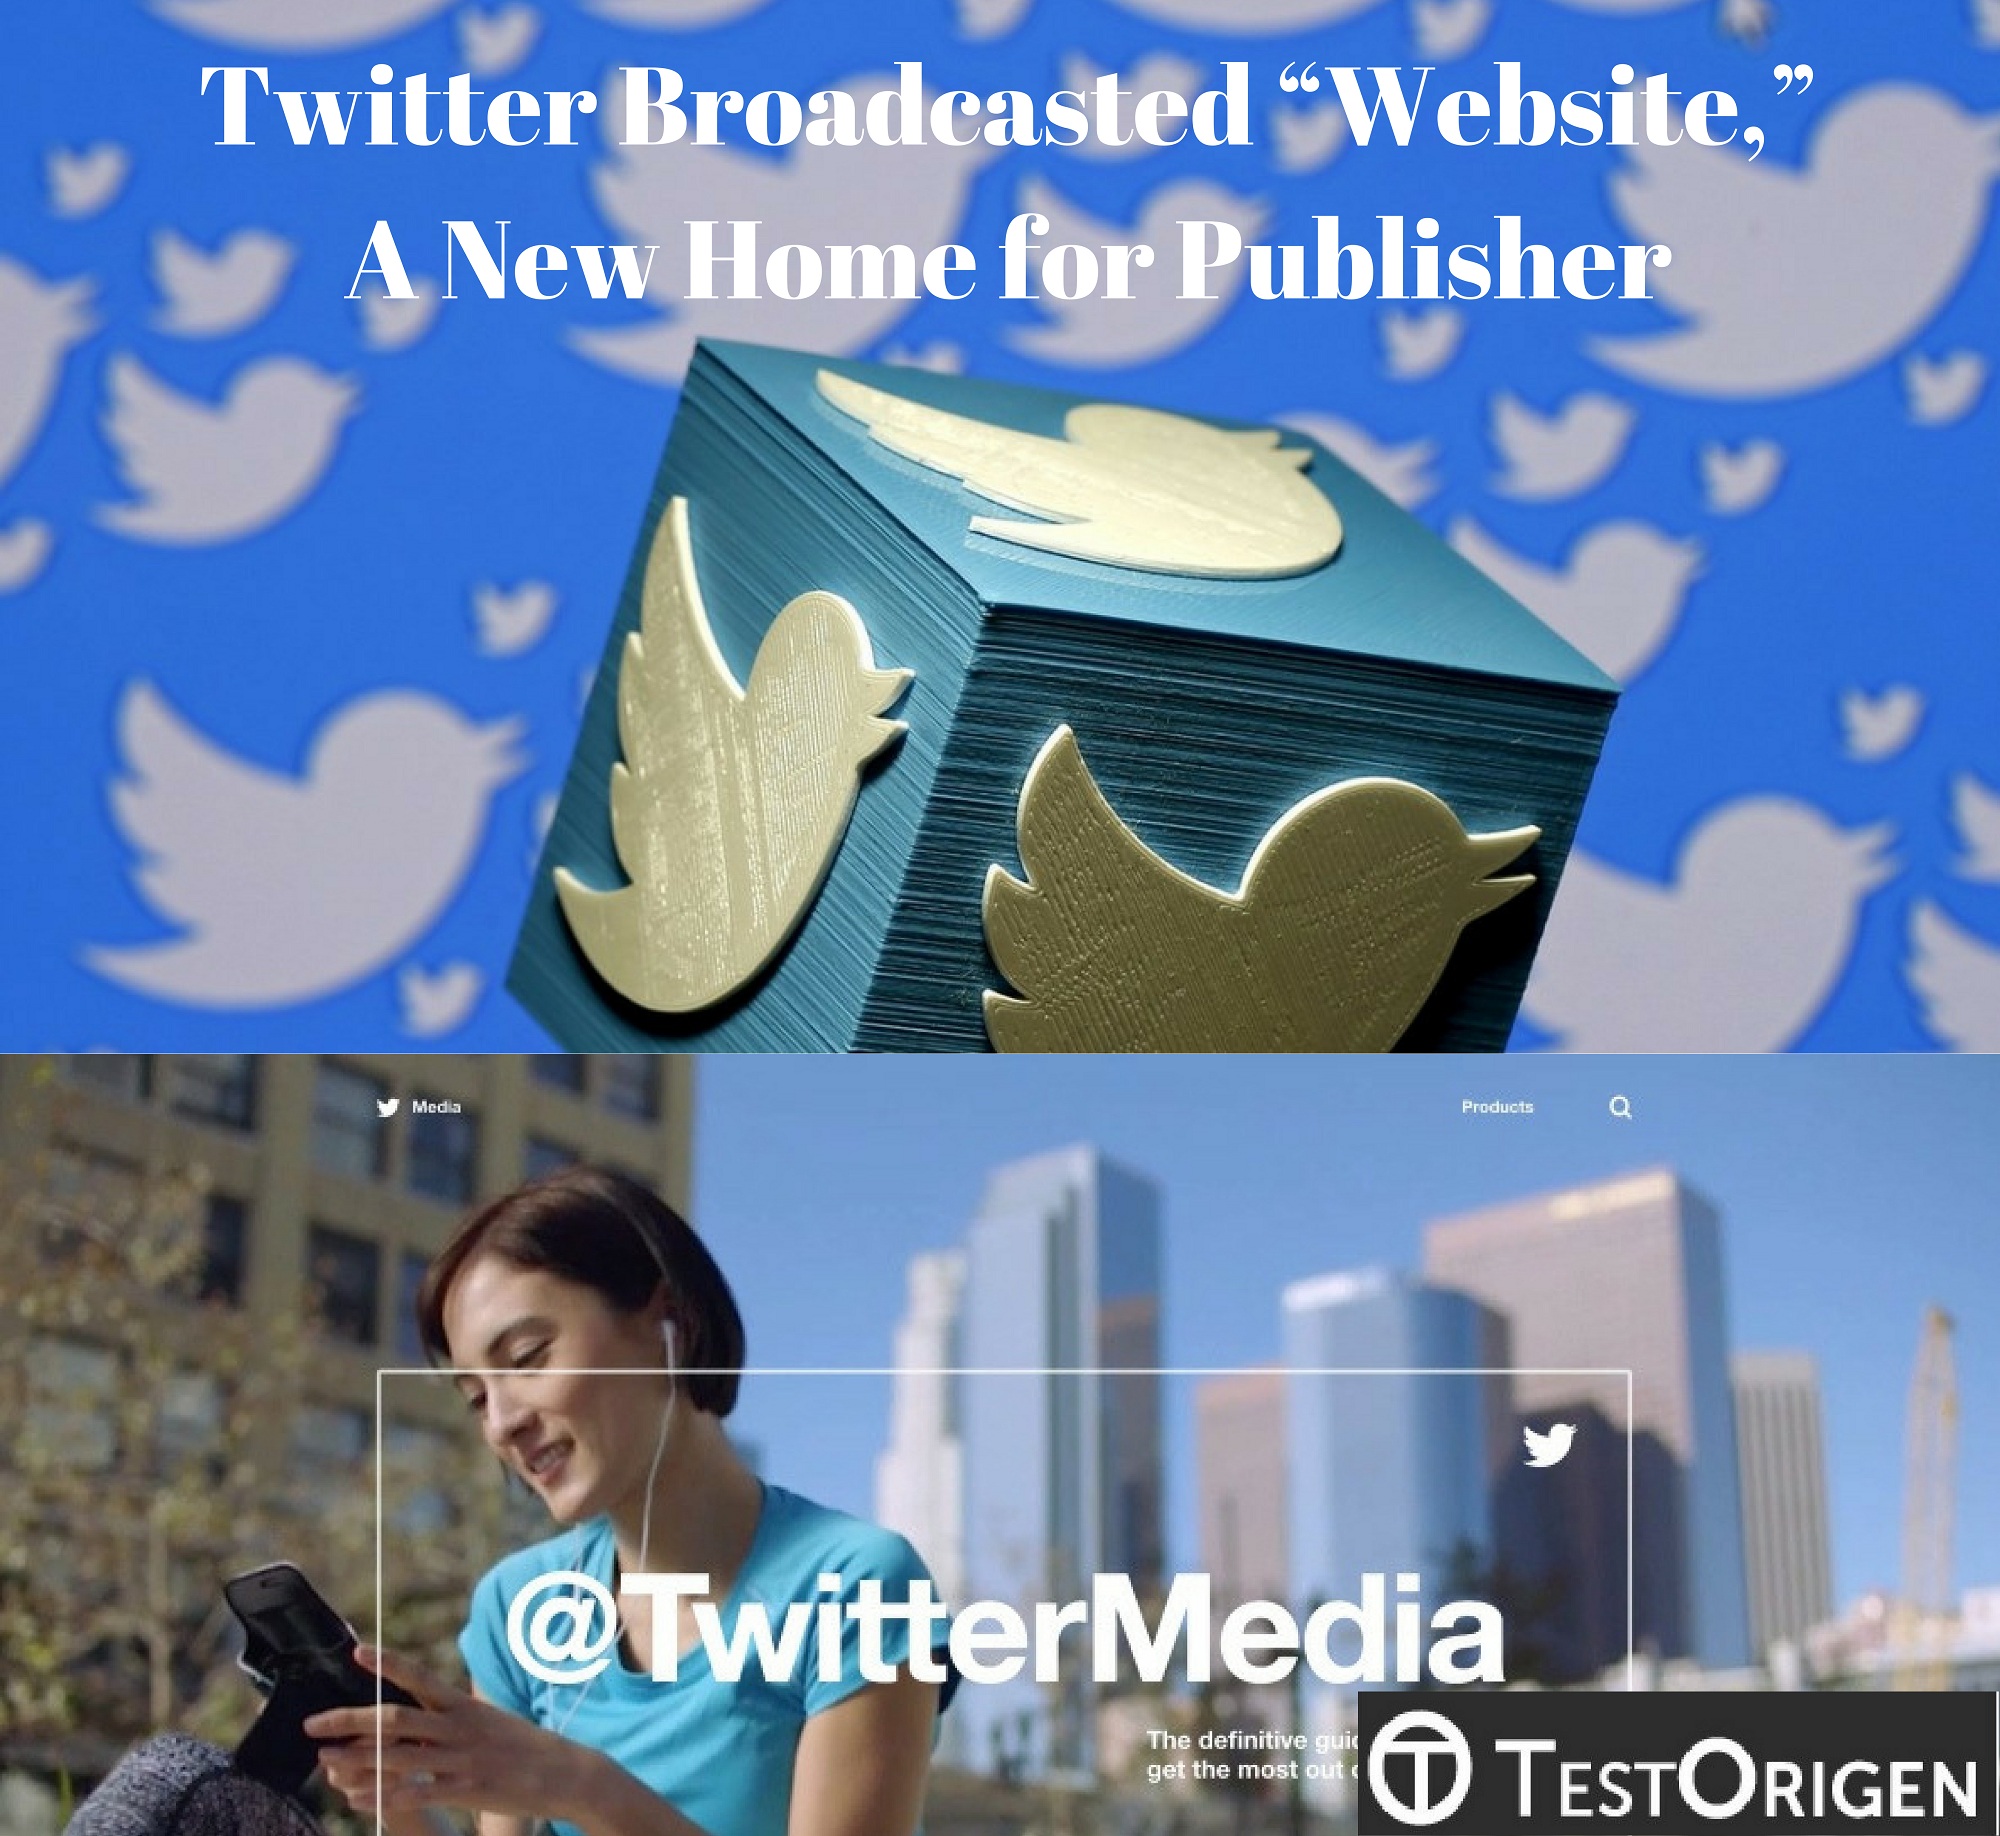 Twitter Broadcasted “Website” A New Home for Publisher